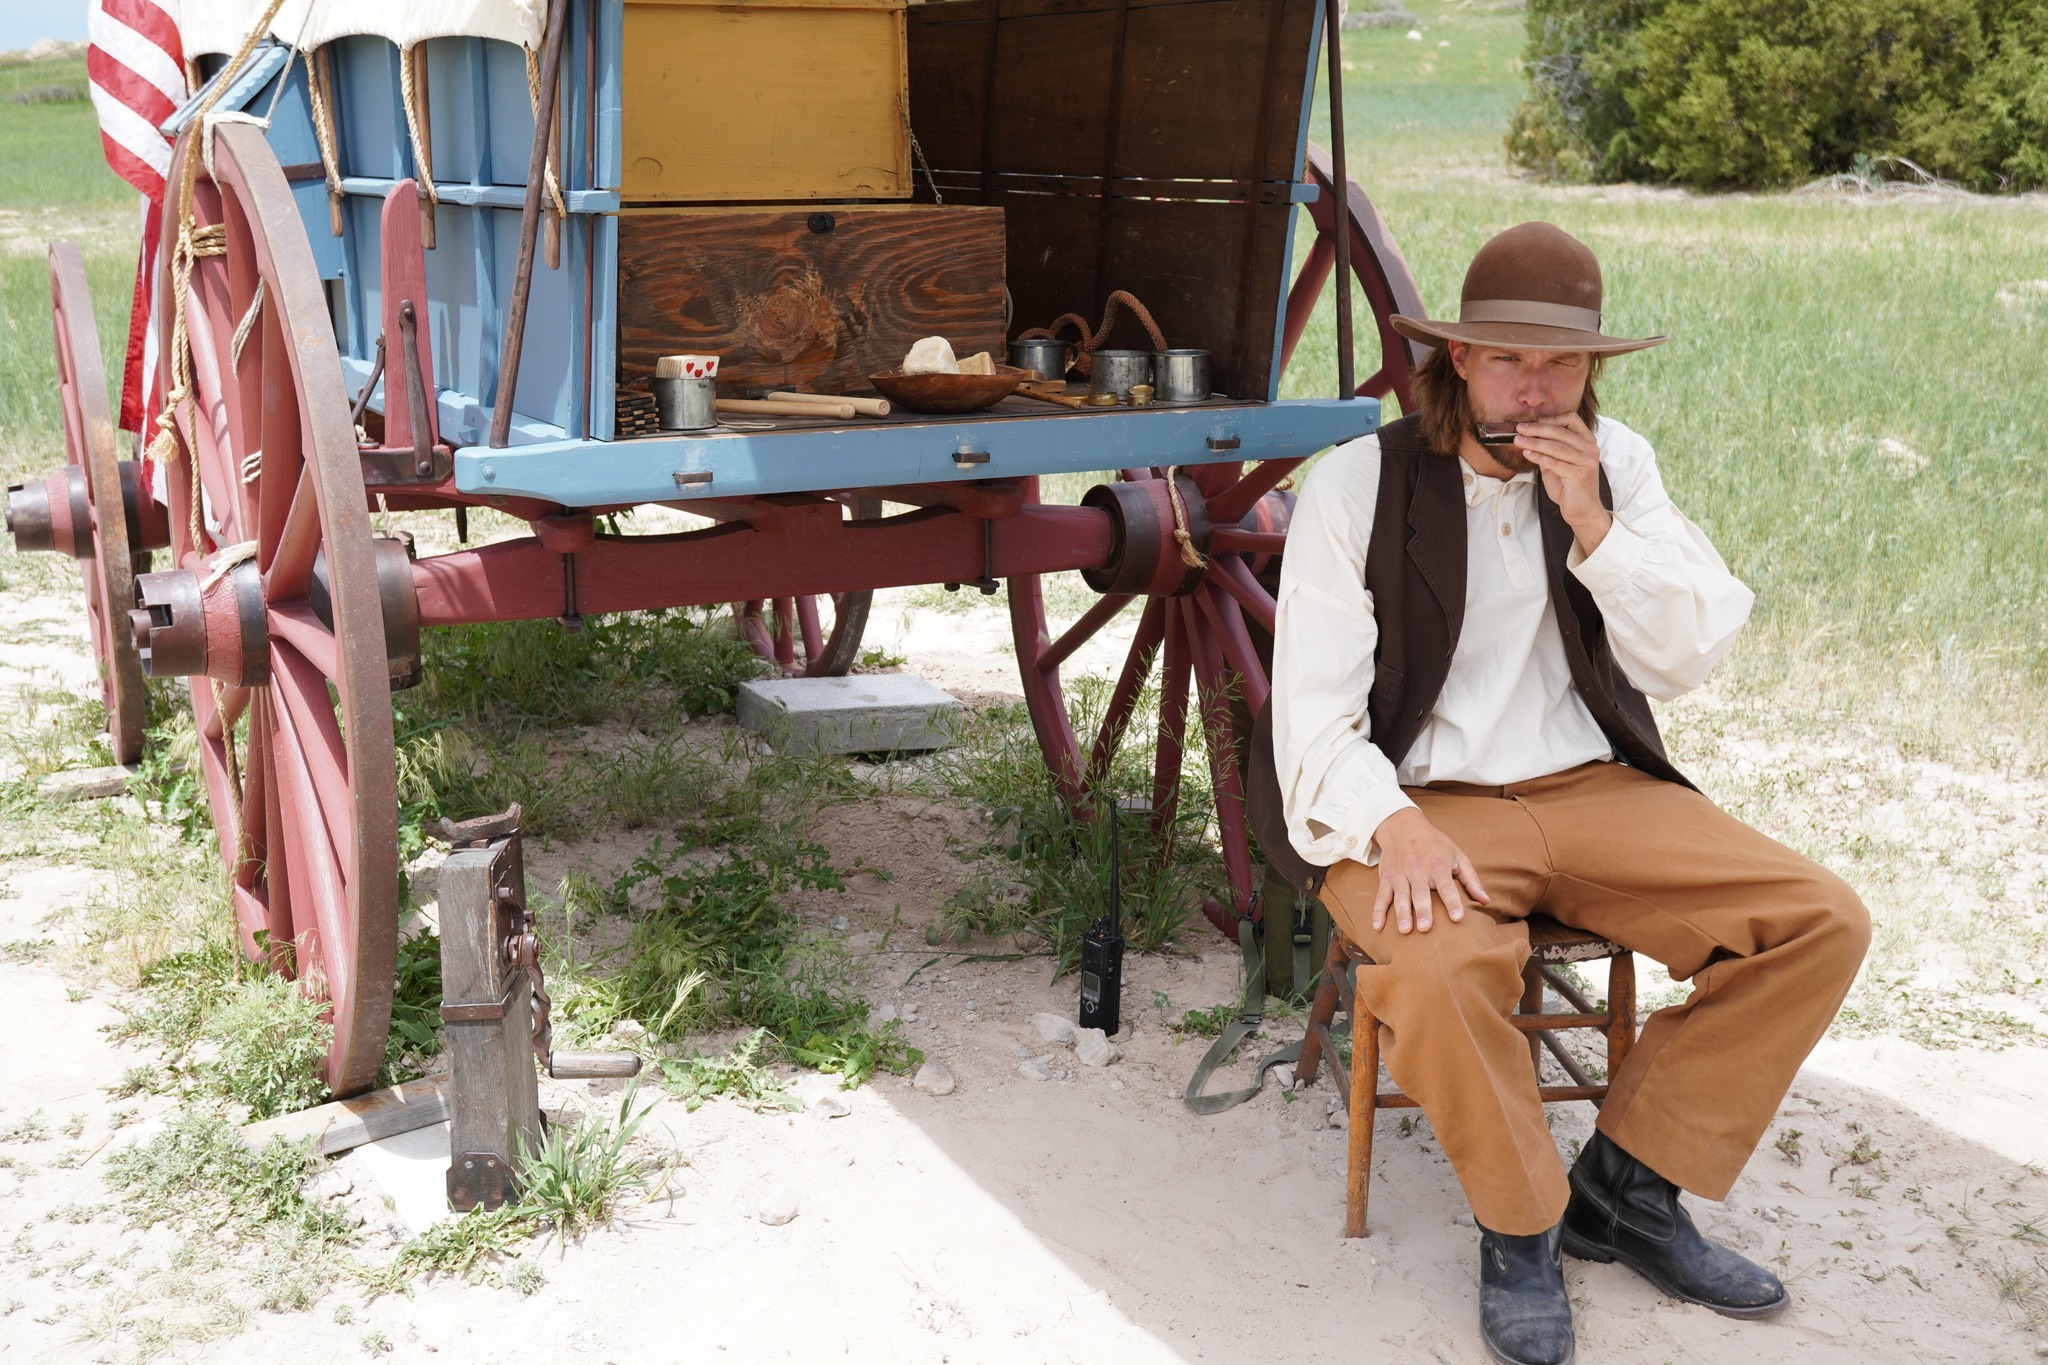 White male in white linen shirt, dark vest and brown pants appearing to be from the 1850s sits behind a blue painted covered wagon.  He plays the harmonica.